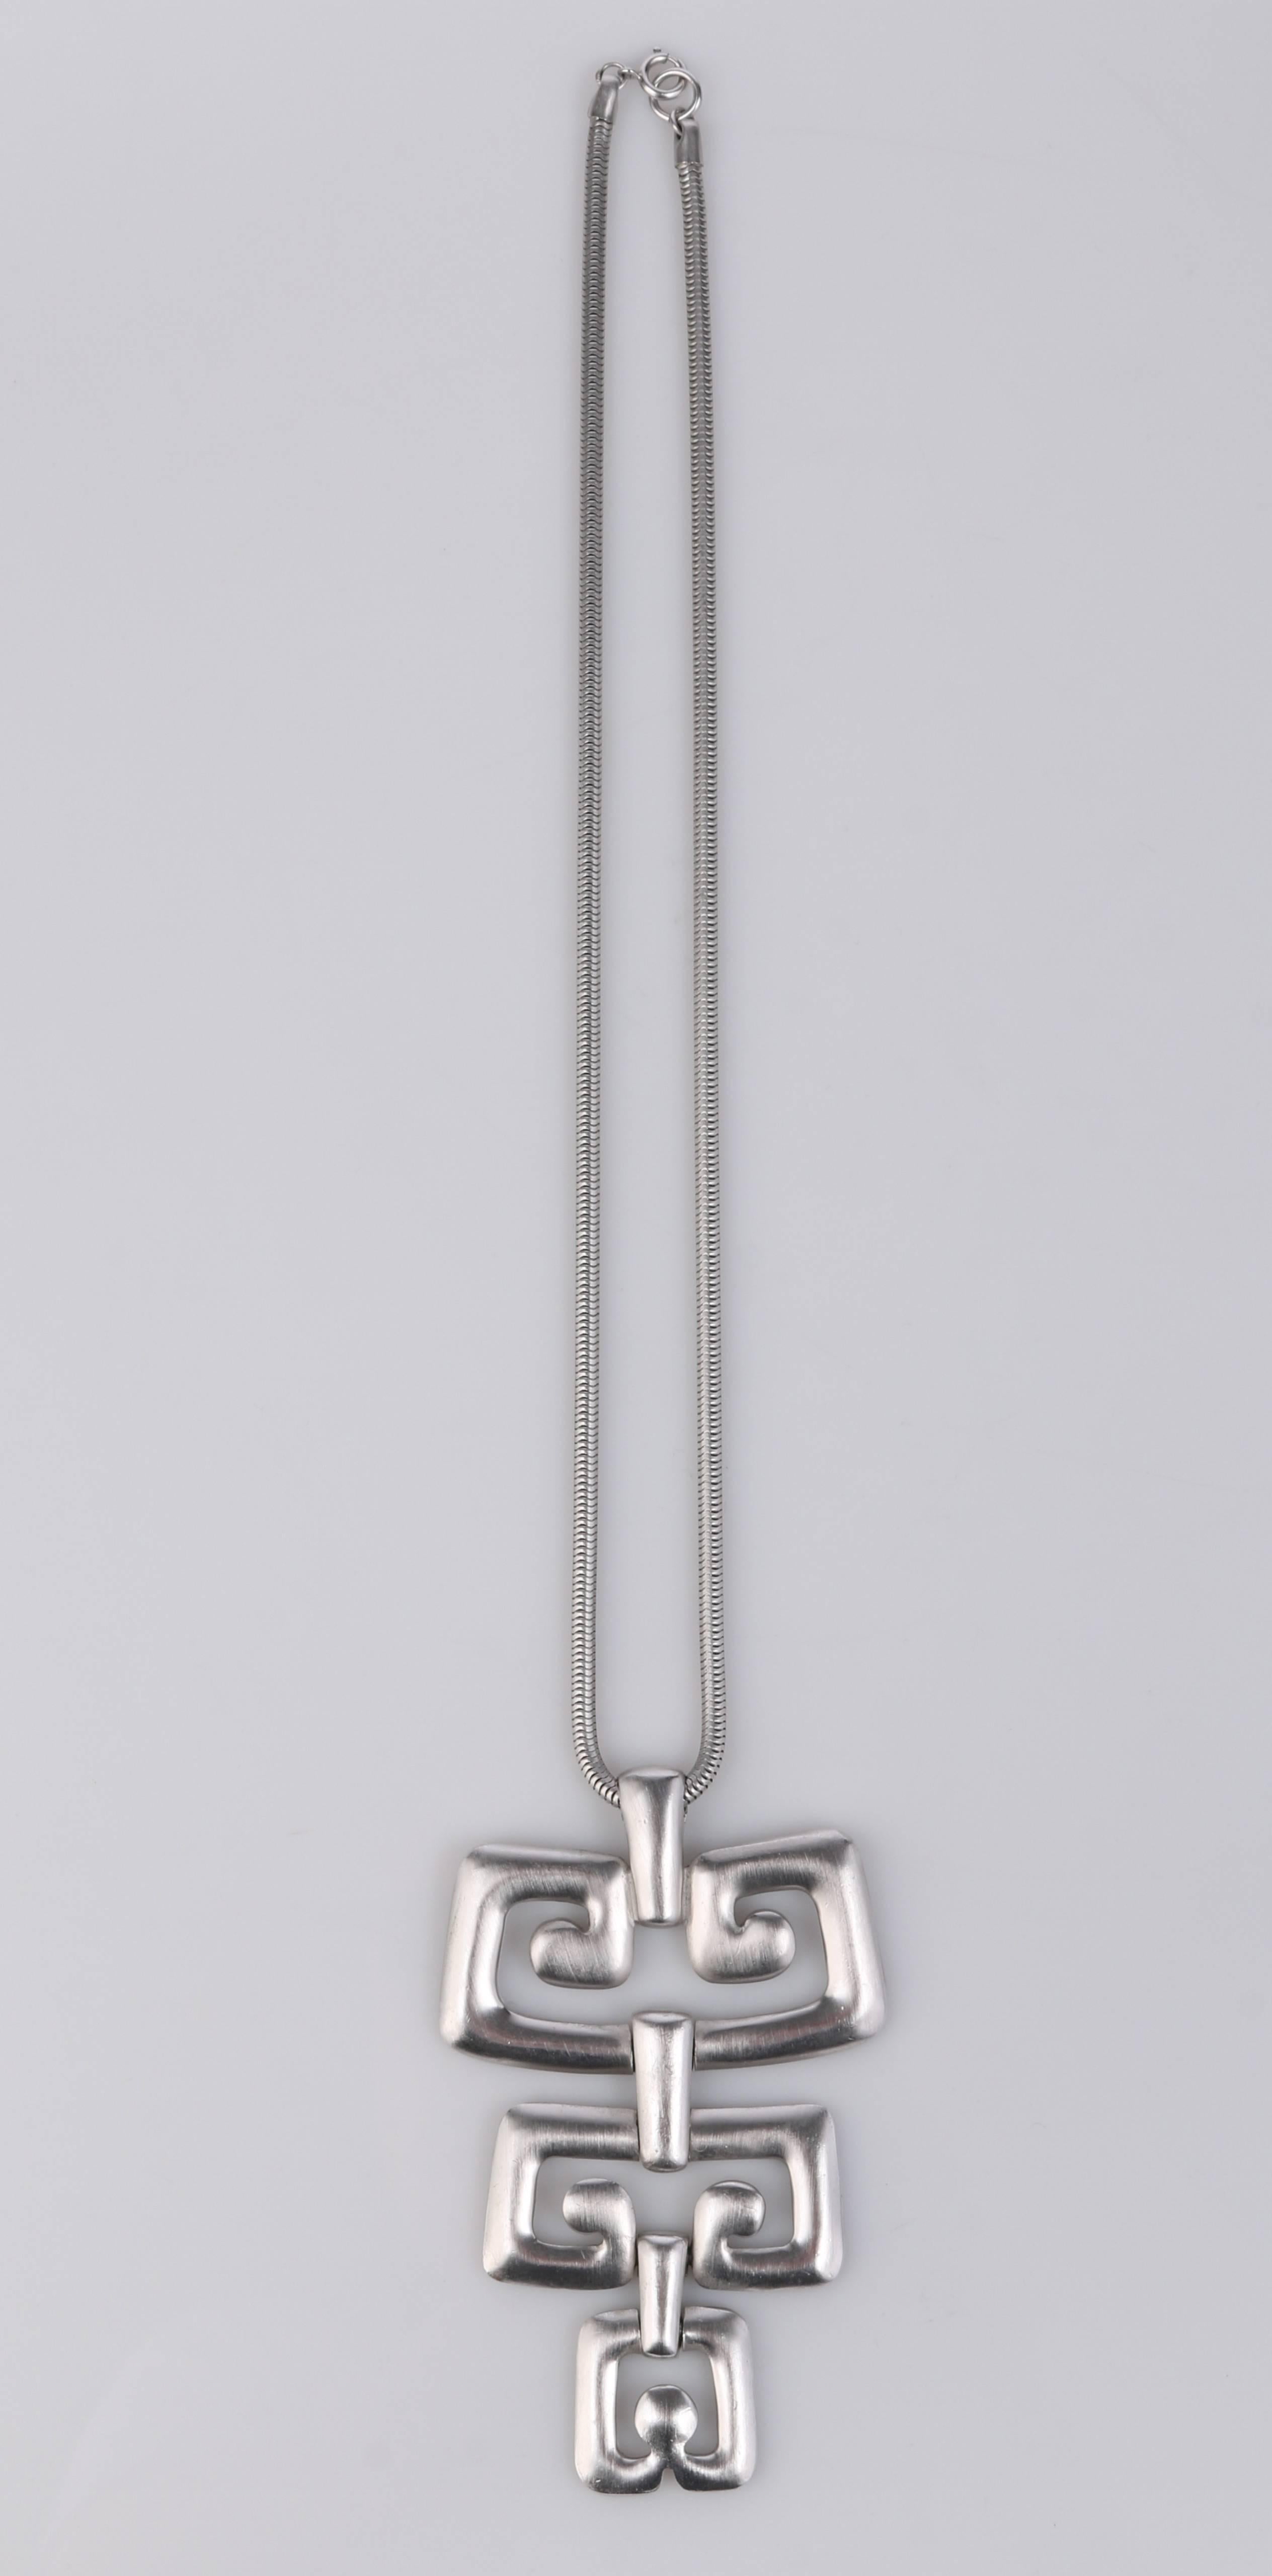 Vintage c.1970s Trifari silver tone statement, modernist, abstract, geometric, pendant on silver tone snake chain. Huge articulated geometric pendant is made of cut out brushed matte finish silver tone metal and measures approximately 4 3/4